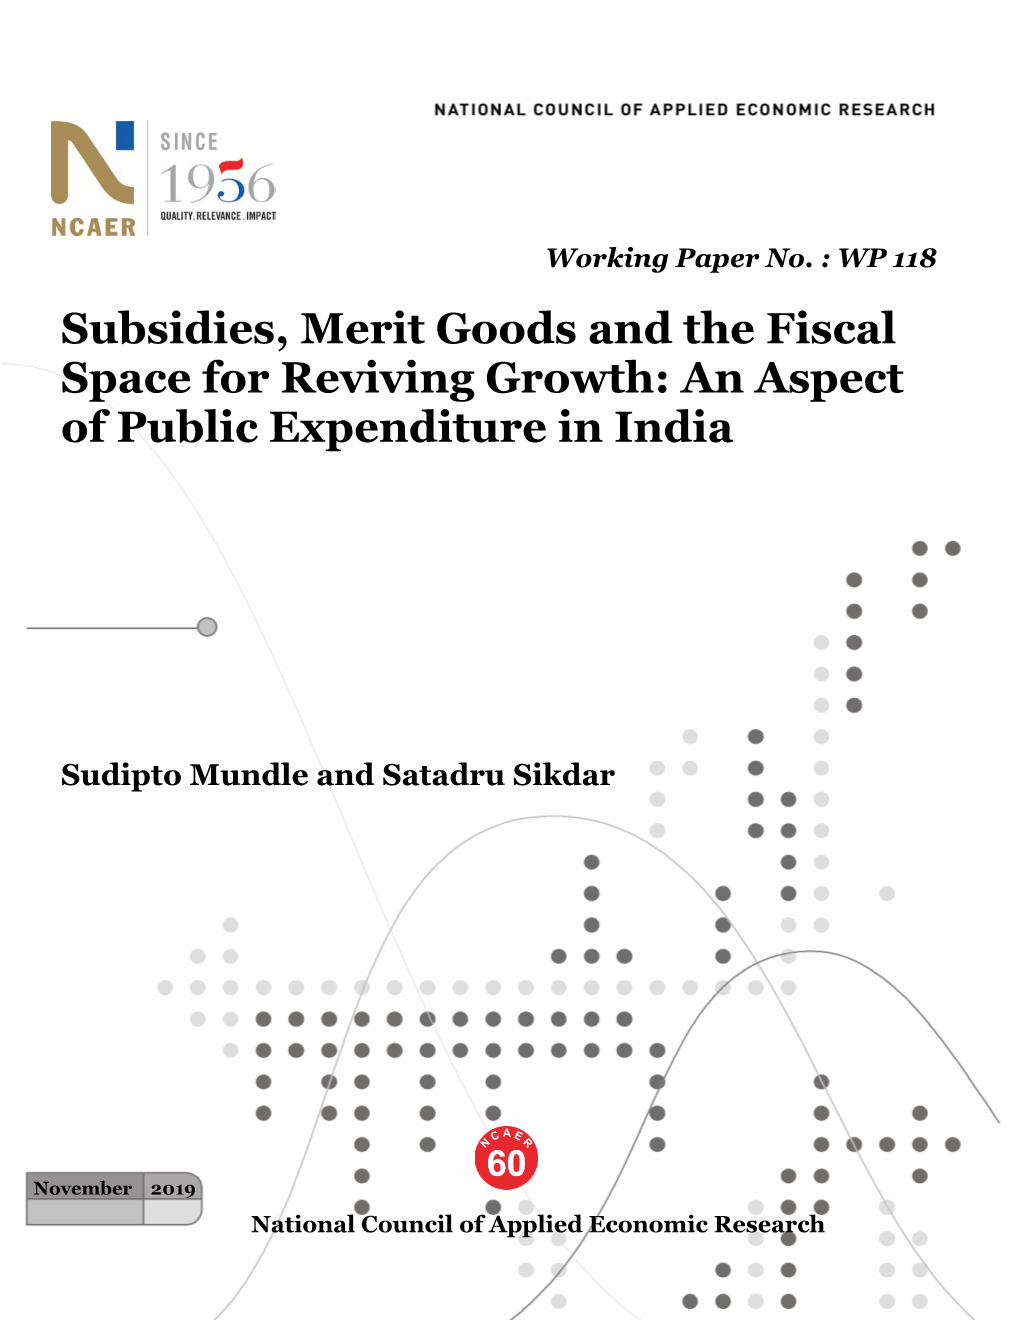 Subsidies, Merit Goods and the Fiscal Space for Reviving Growth: an Aspect of Public Expenditure in India*